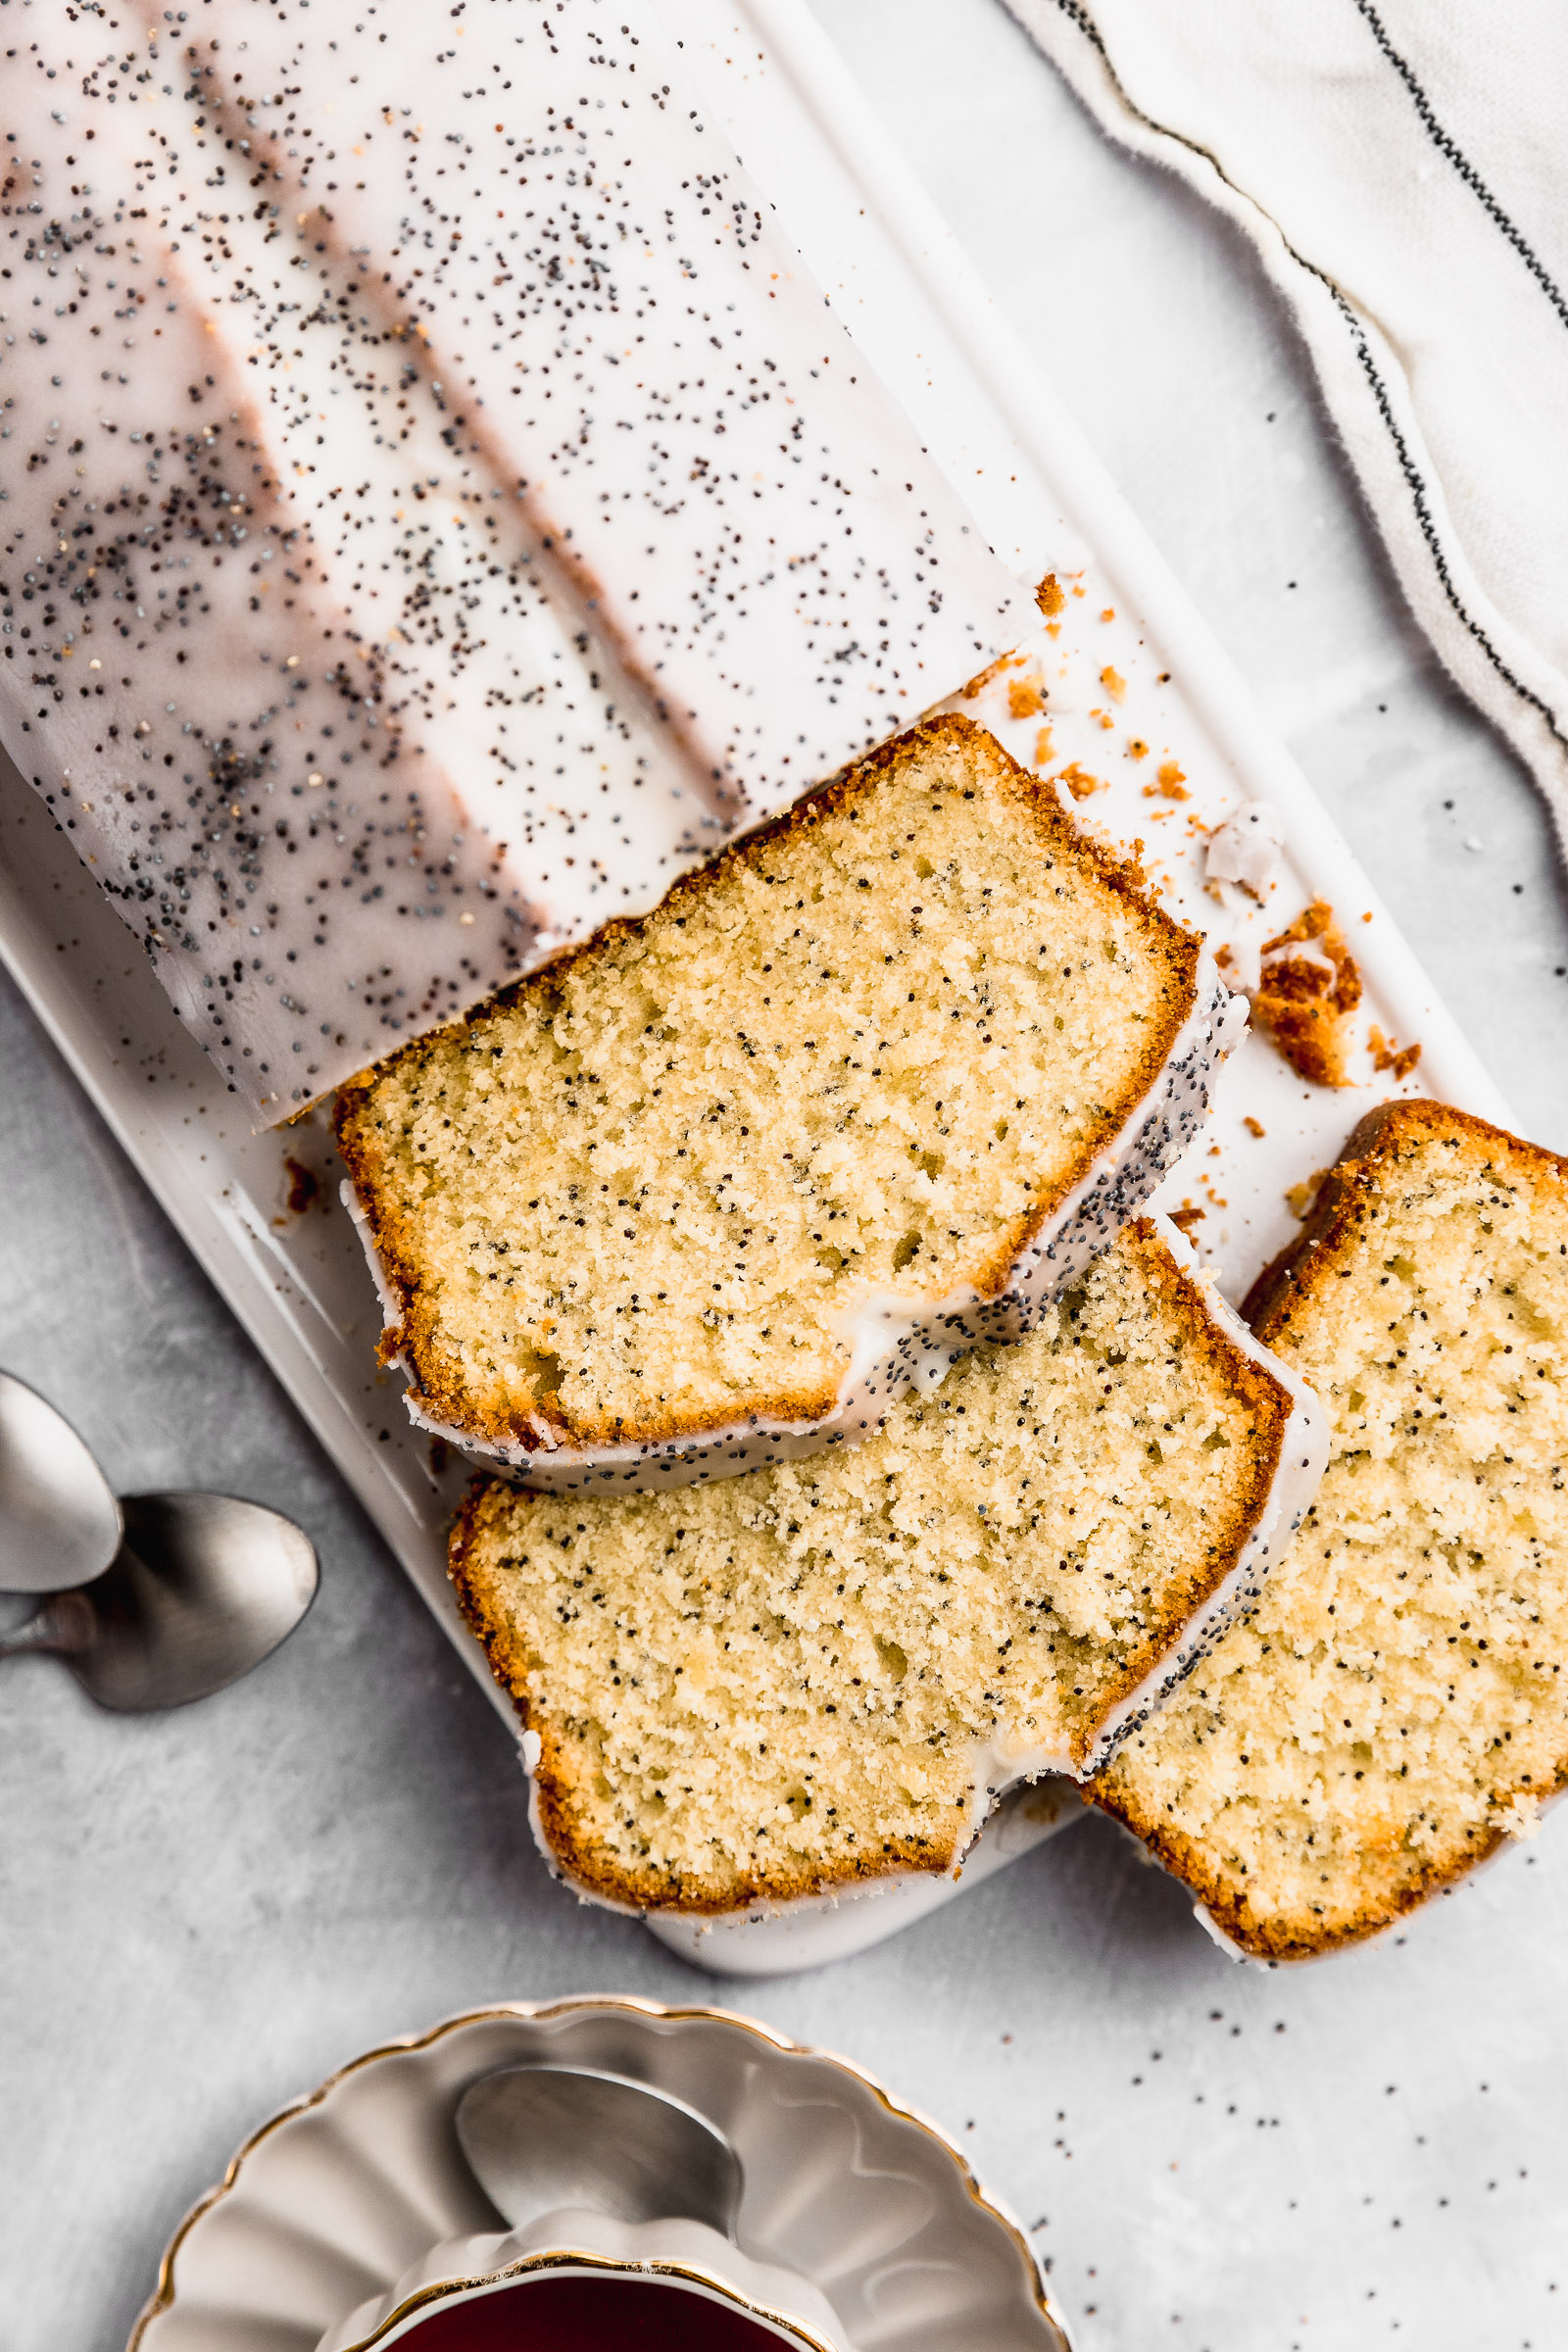 Lemon Poppy Seed Loaf with Lemon Glaze, with three slices cut to show the inside.